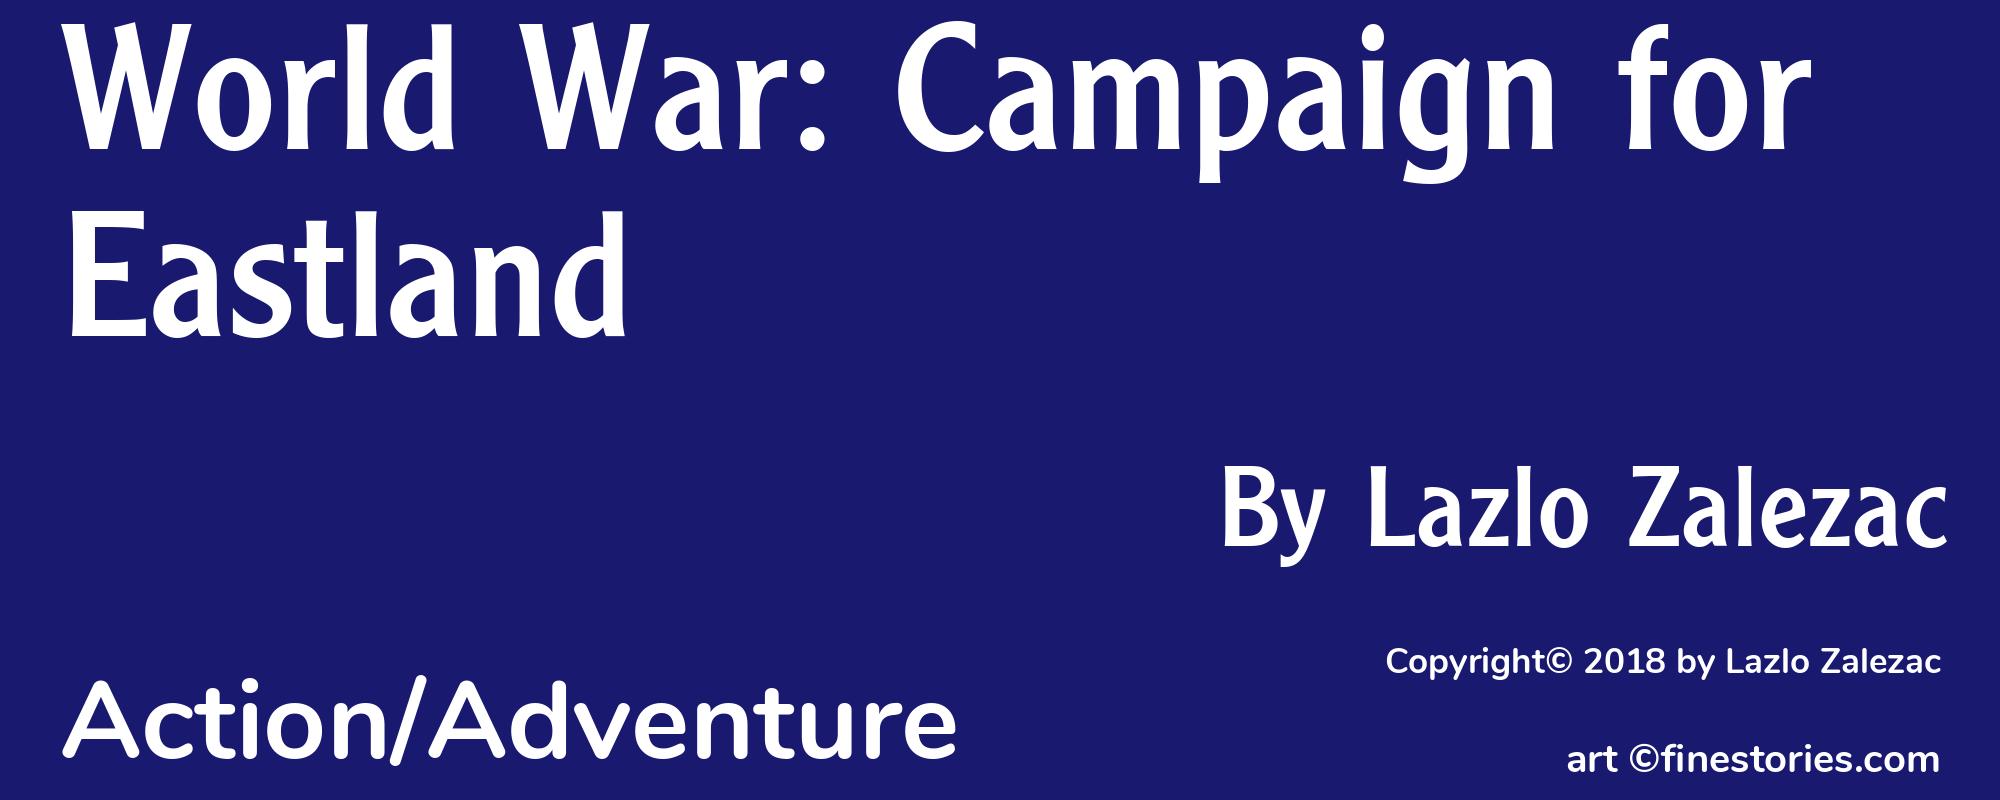 World War: Campaign for Eastland - Cover